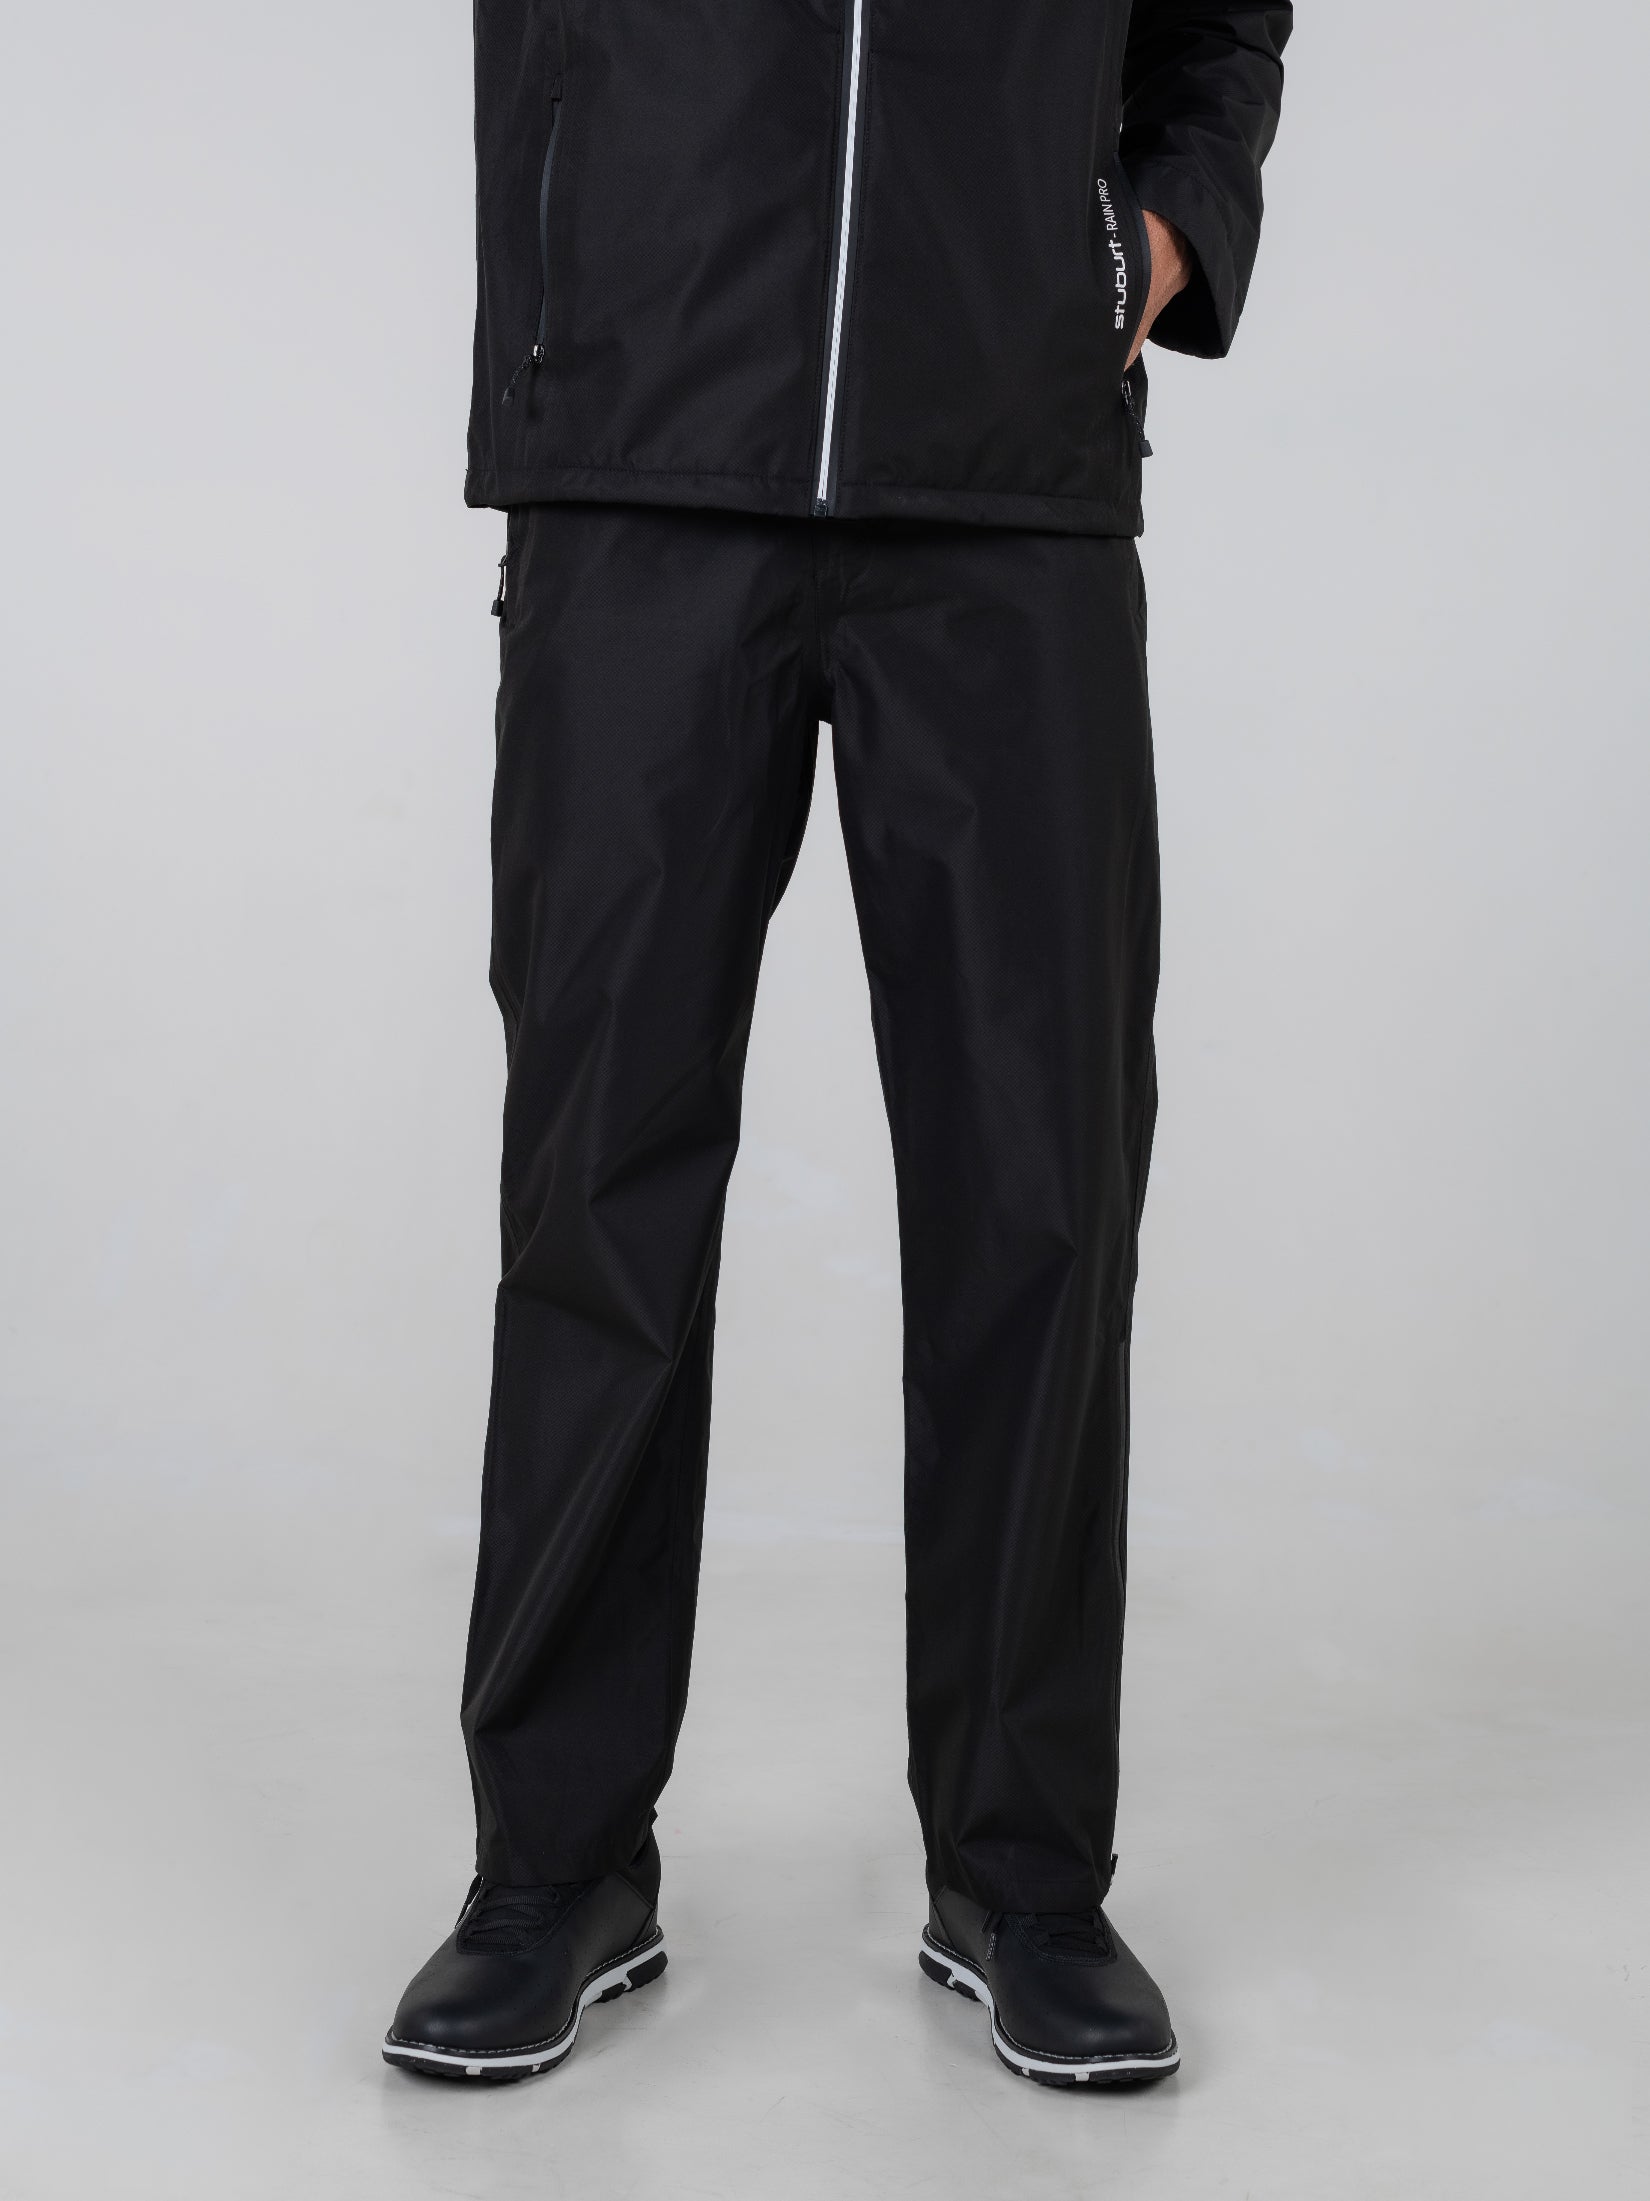 Men's Steall II Thermo Waterproof Trousers - Black | Craghoppers UK